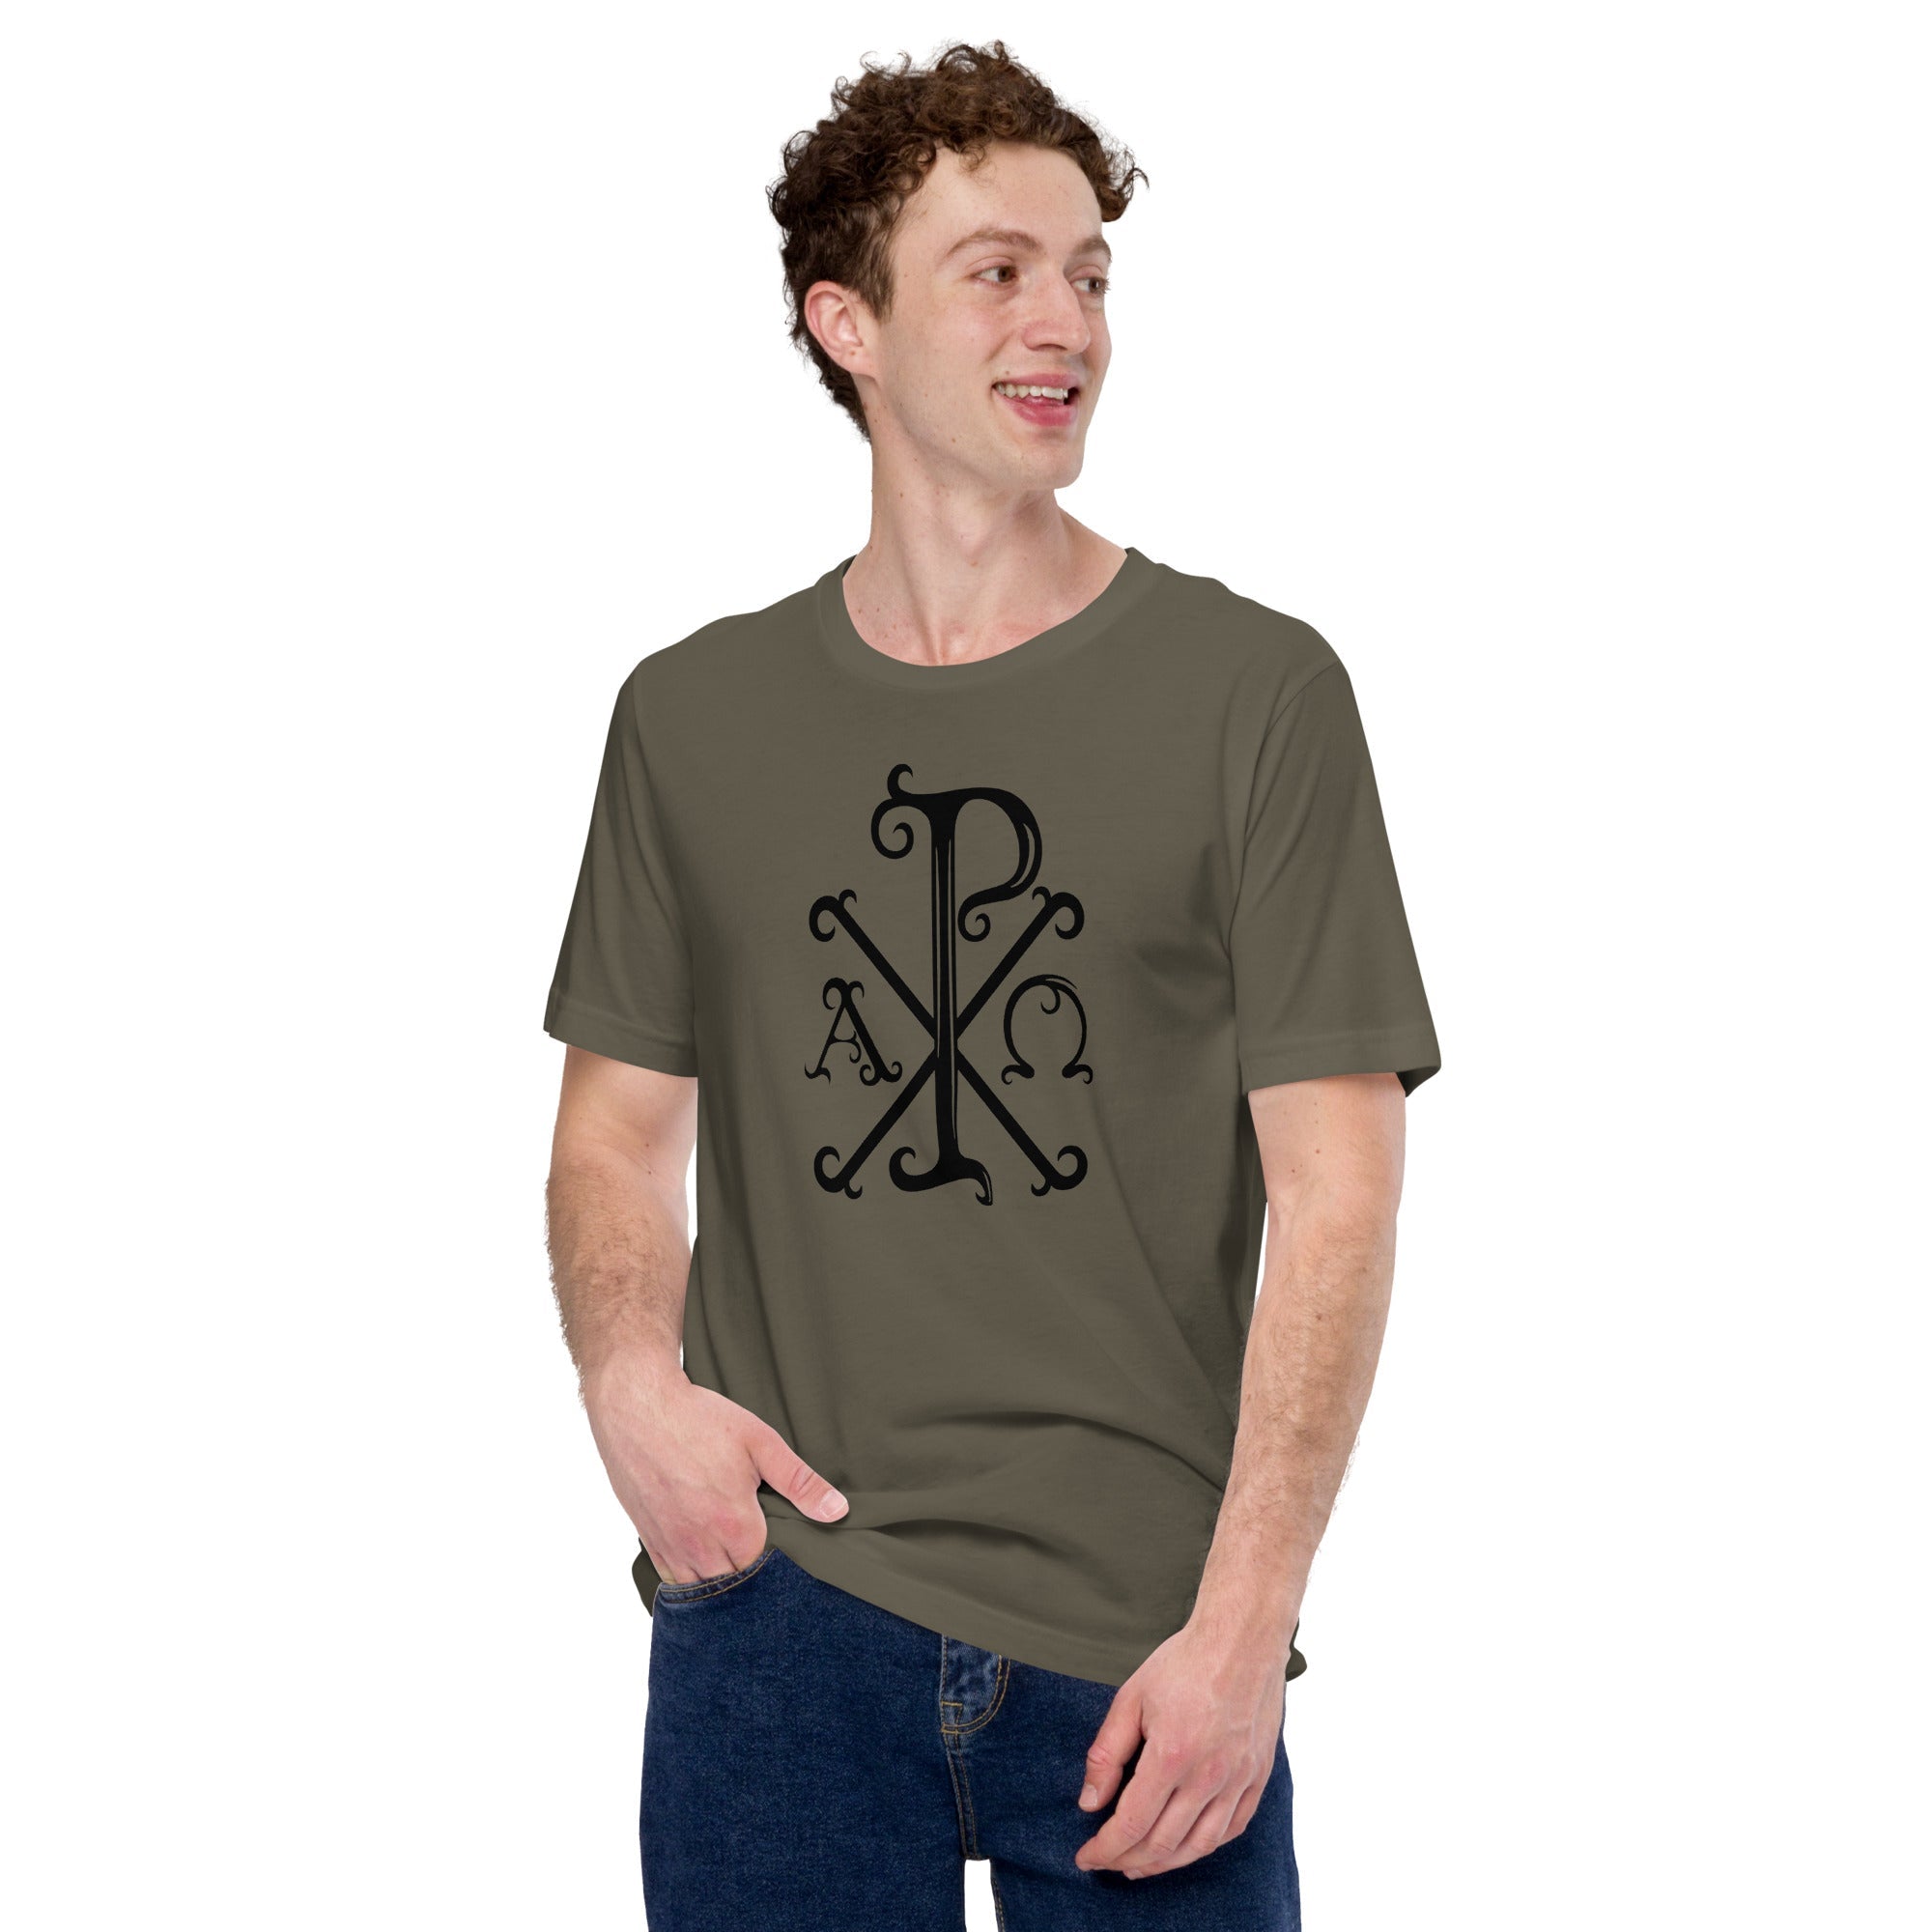 Chi-Rio with Alpha and Omega in Black T-Shirt - Catholicamtees